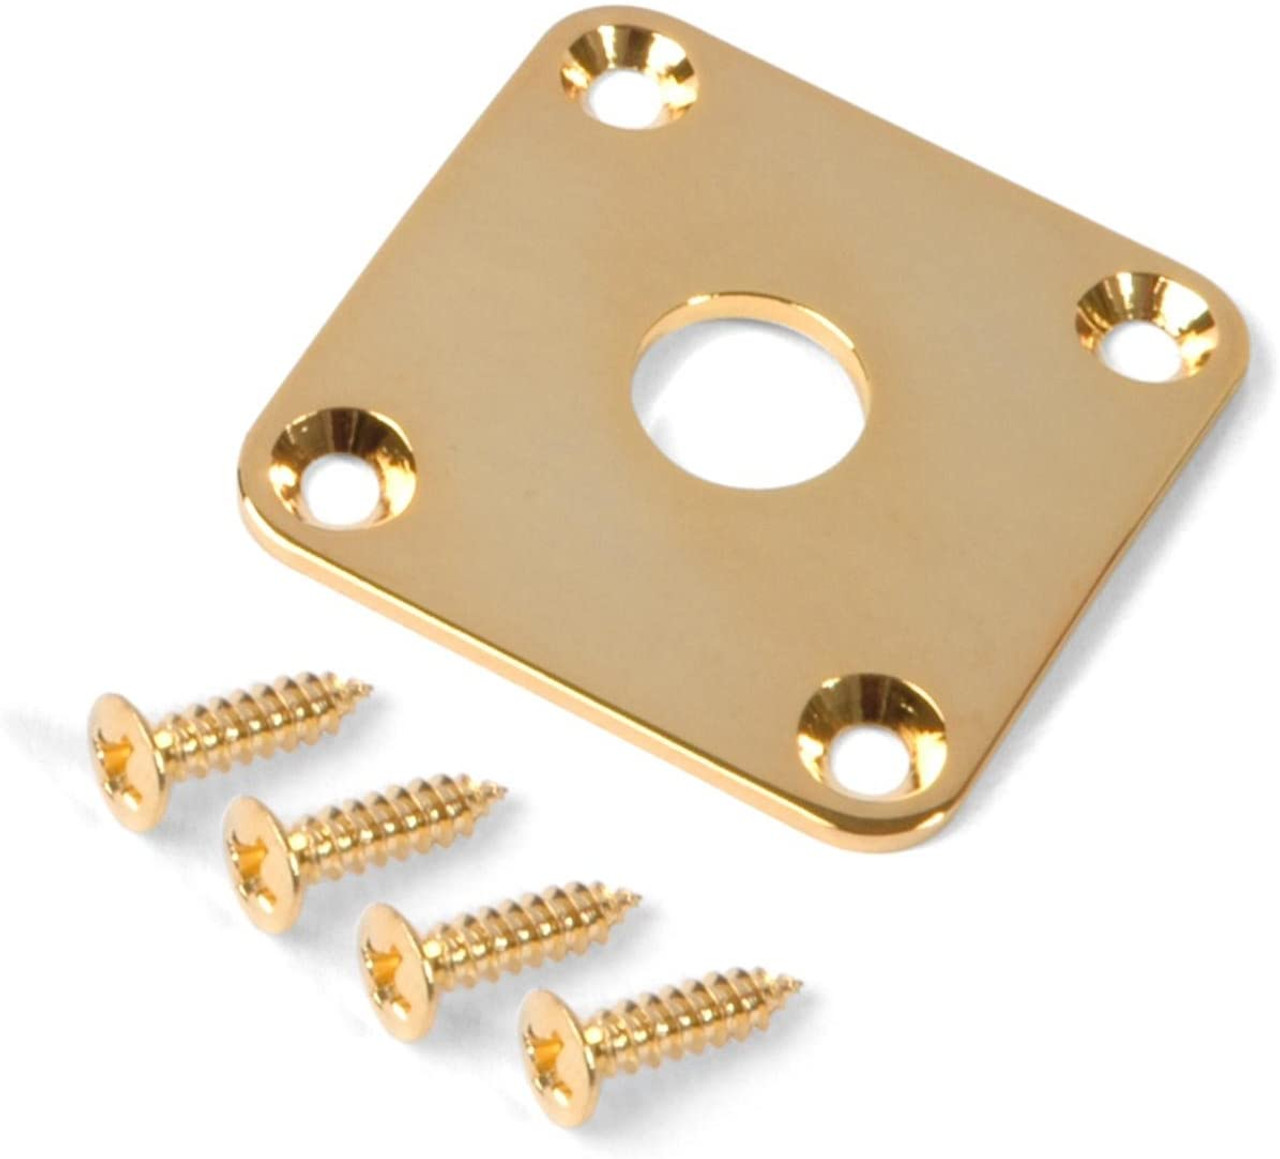 Gotoh Gold Metal Square Jackplate for Les Paul with screws